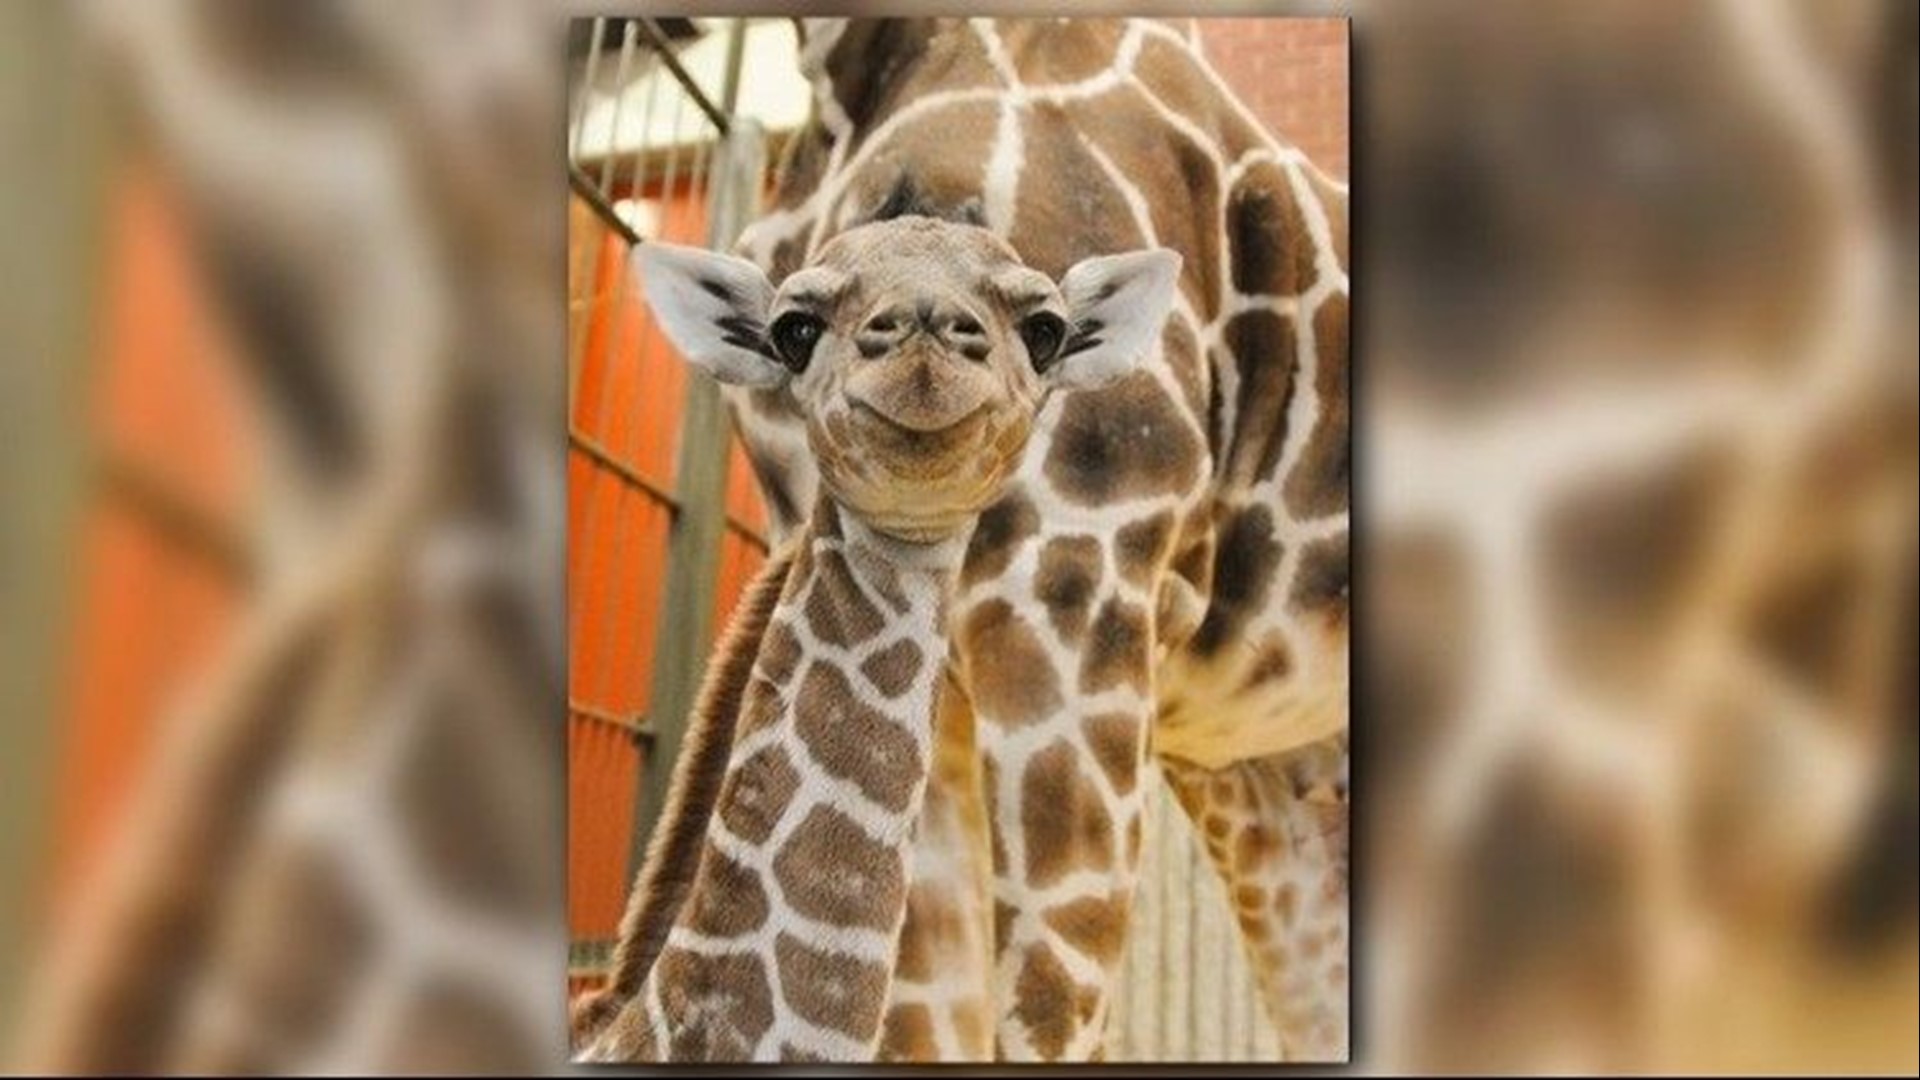 Dobby, the beloved baby giraffe at the Denver Zoo, is growing up! He turned two years old on Thursday.